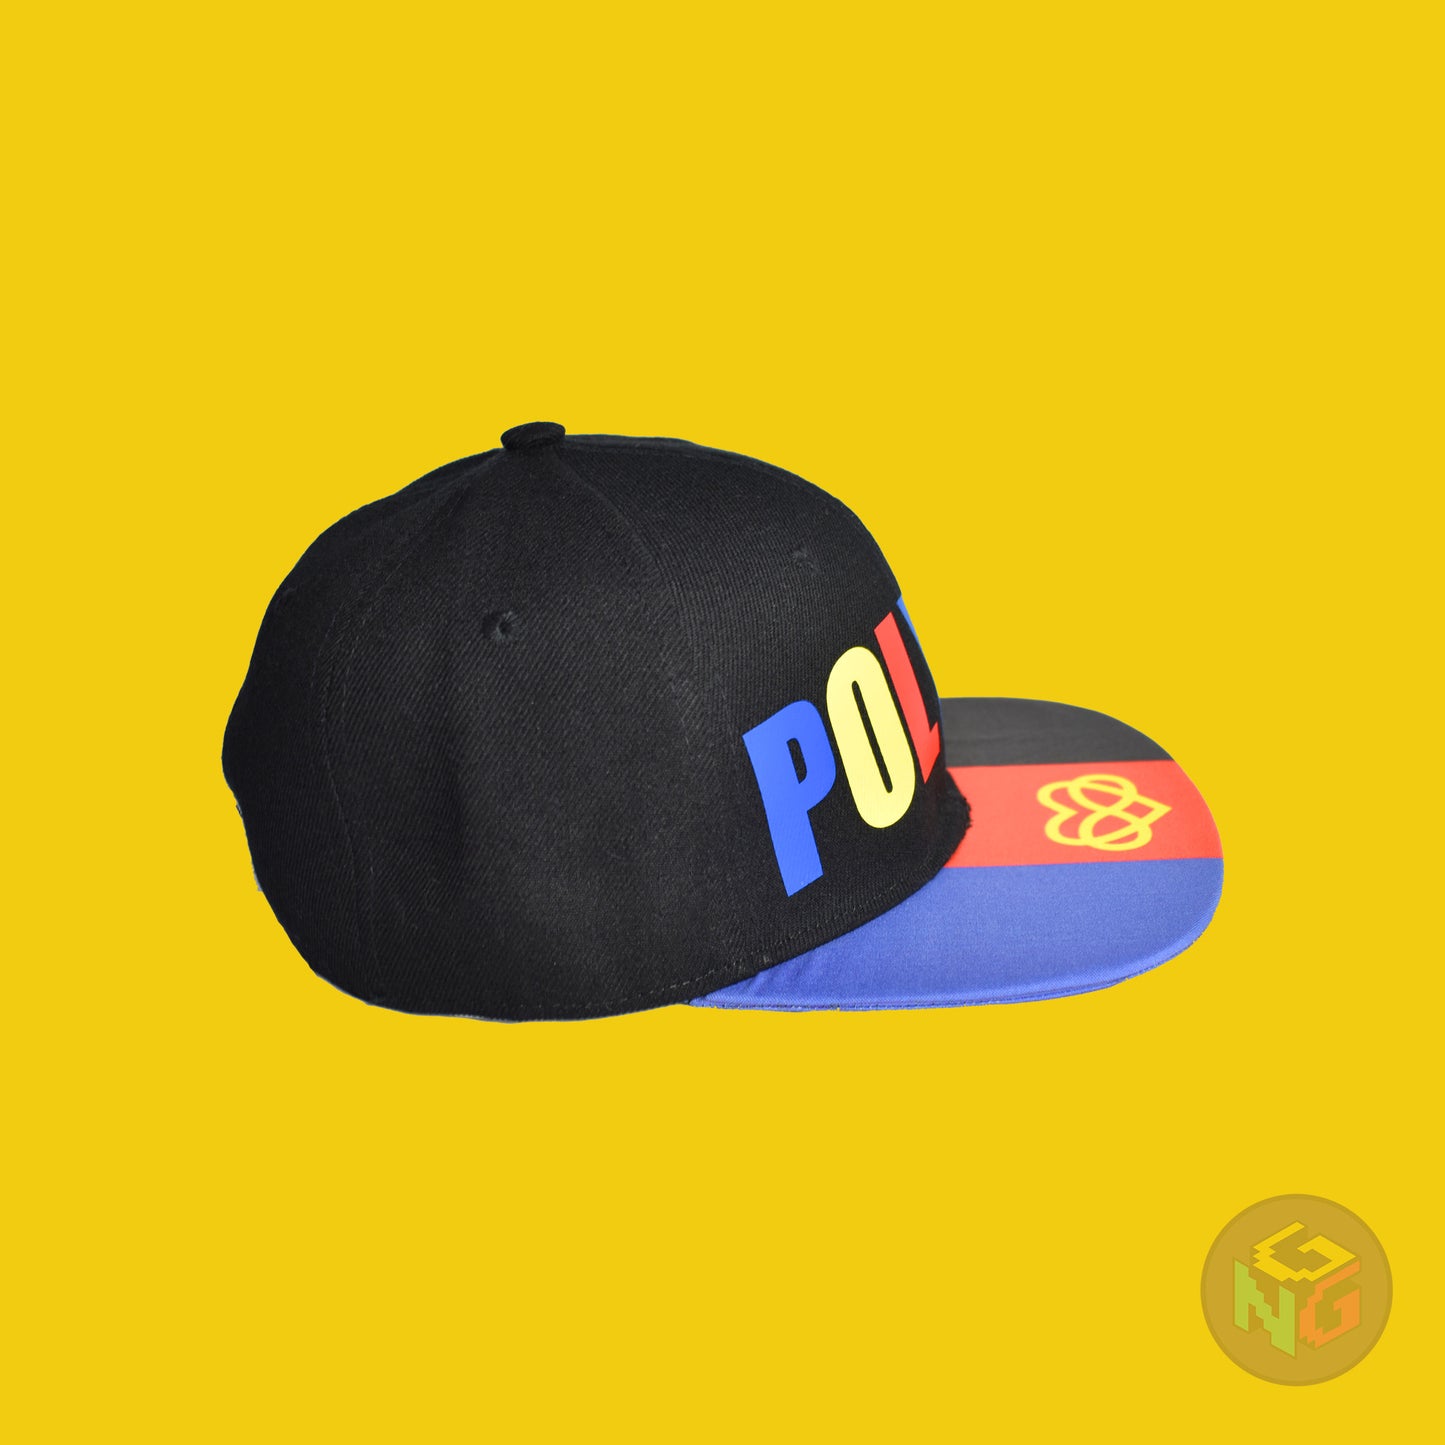 Black flat bill snapback hat. The brim has the polyamory pride flag with the heart infinity symbol on both sides and the front of the hat has the word “POLYAM” in red, yellow, and blue letters. Right view